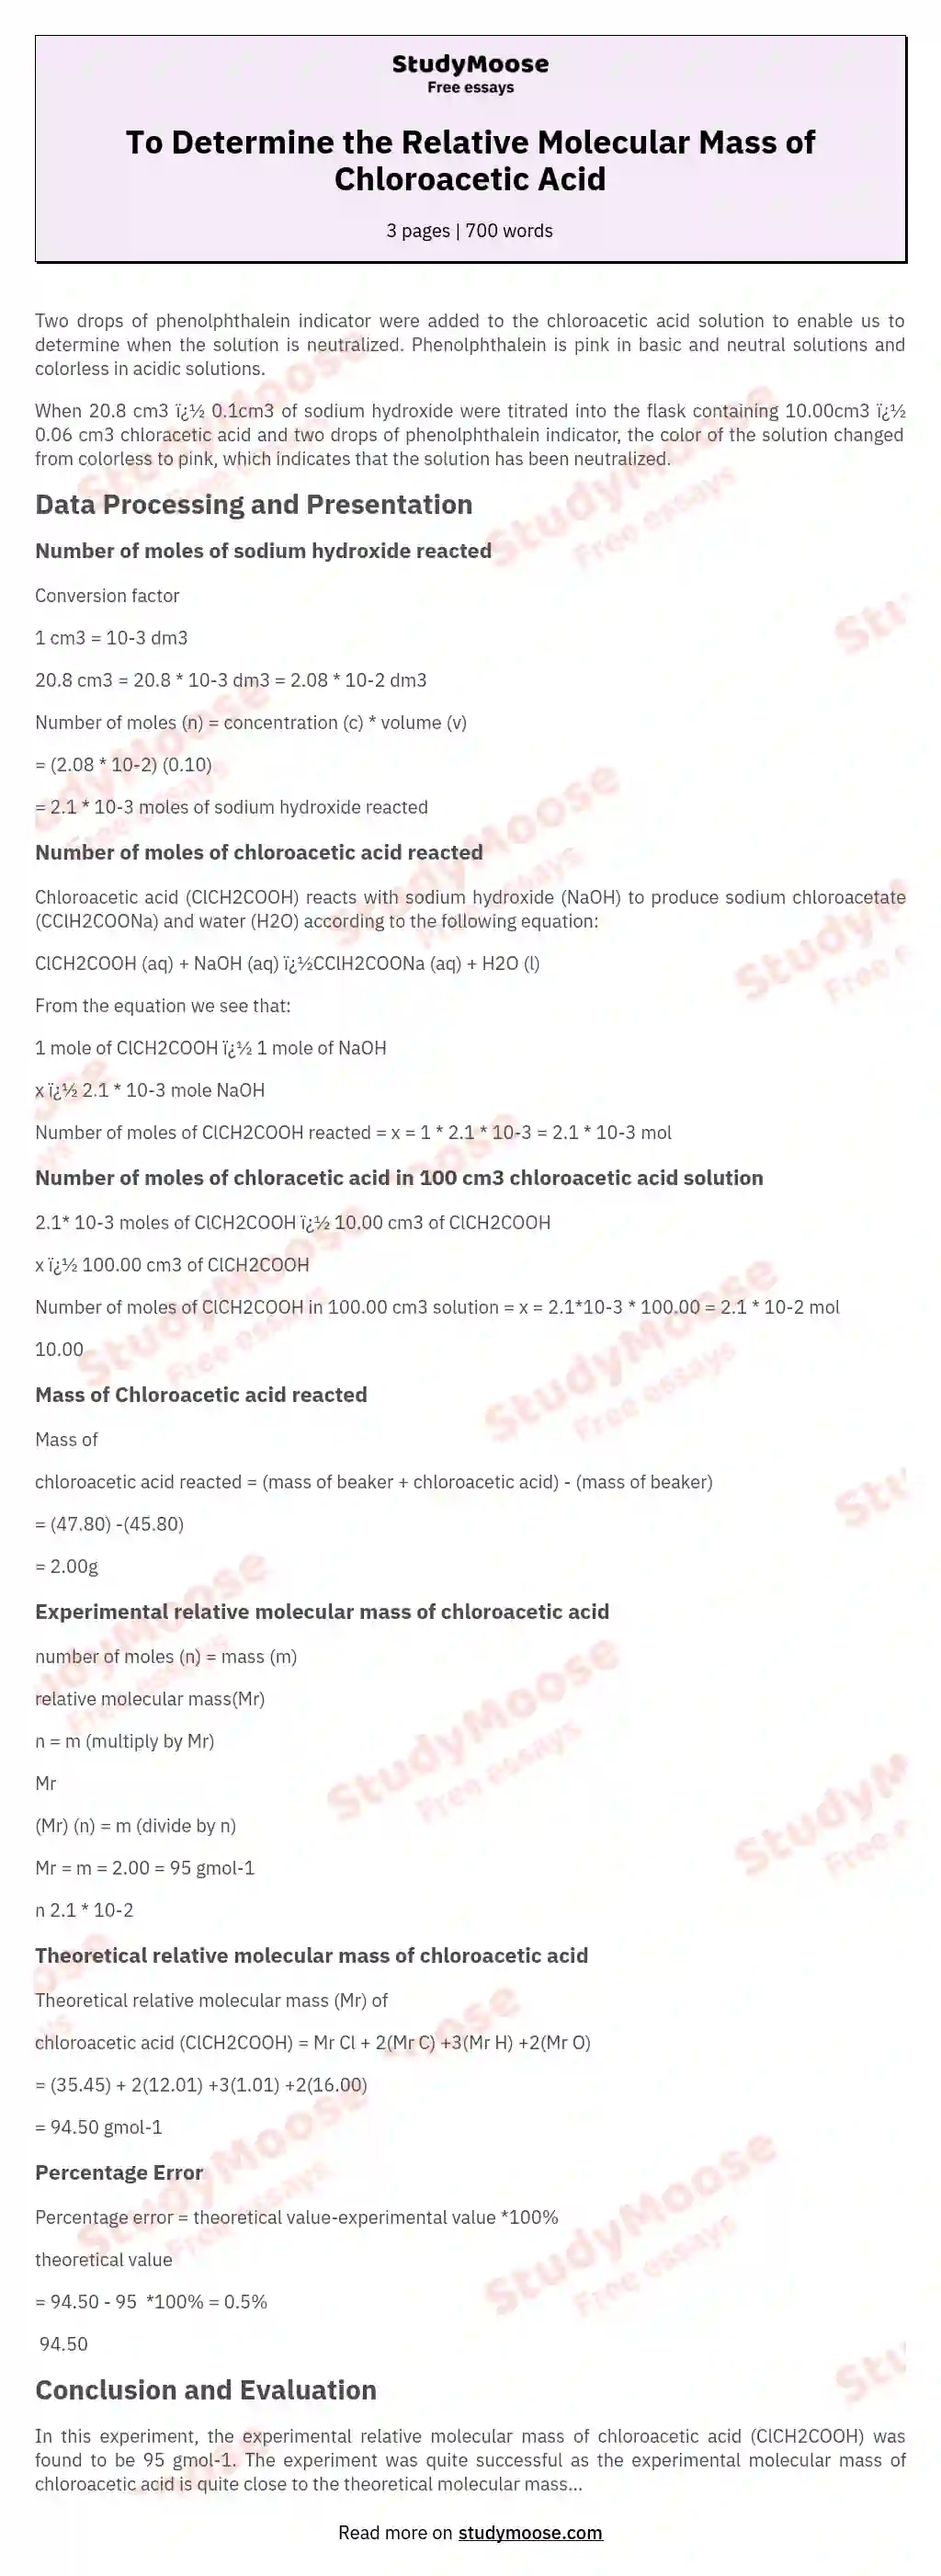 To Determine the Relative Molecular Mass of Chloroacetic Acid essay